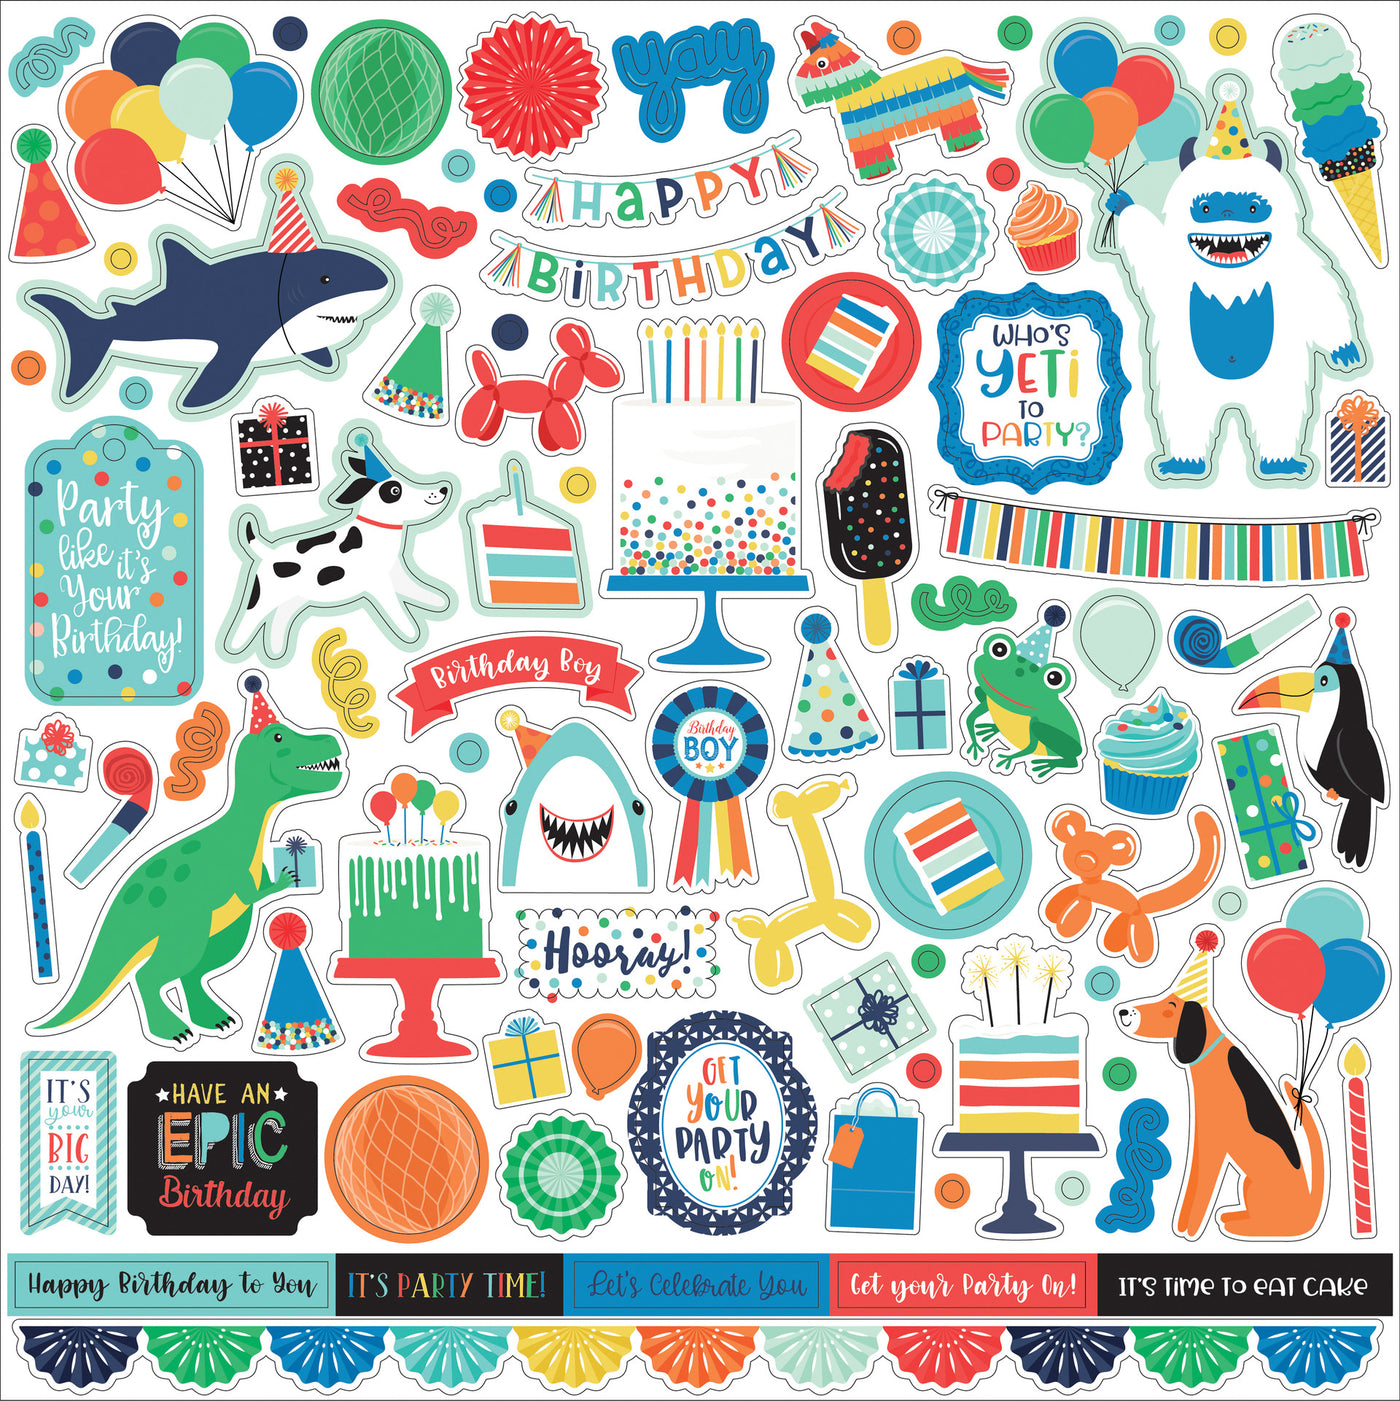 It's Your Birthday Boy Elements 12" x 12" Cardstock Stickers from the It's Your Birthday Boy  Collection by Echo Park. These stickers include balloons, banners, candles, phrases, borders, and more!  